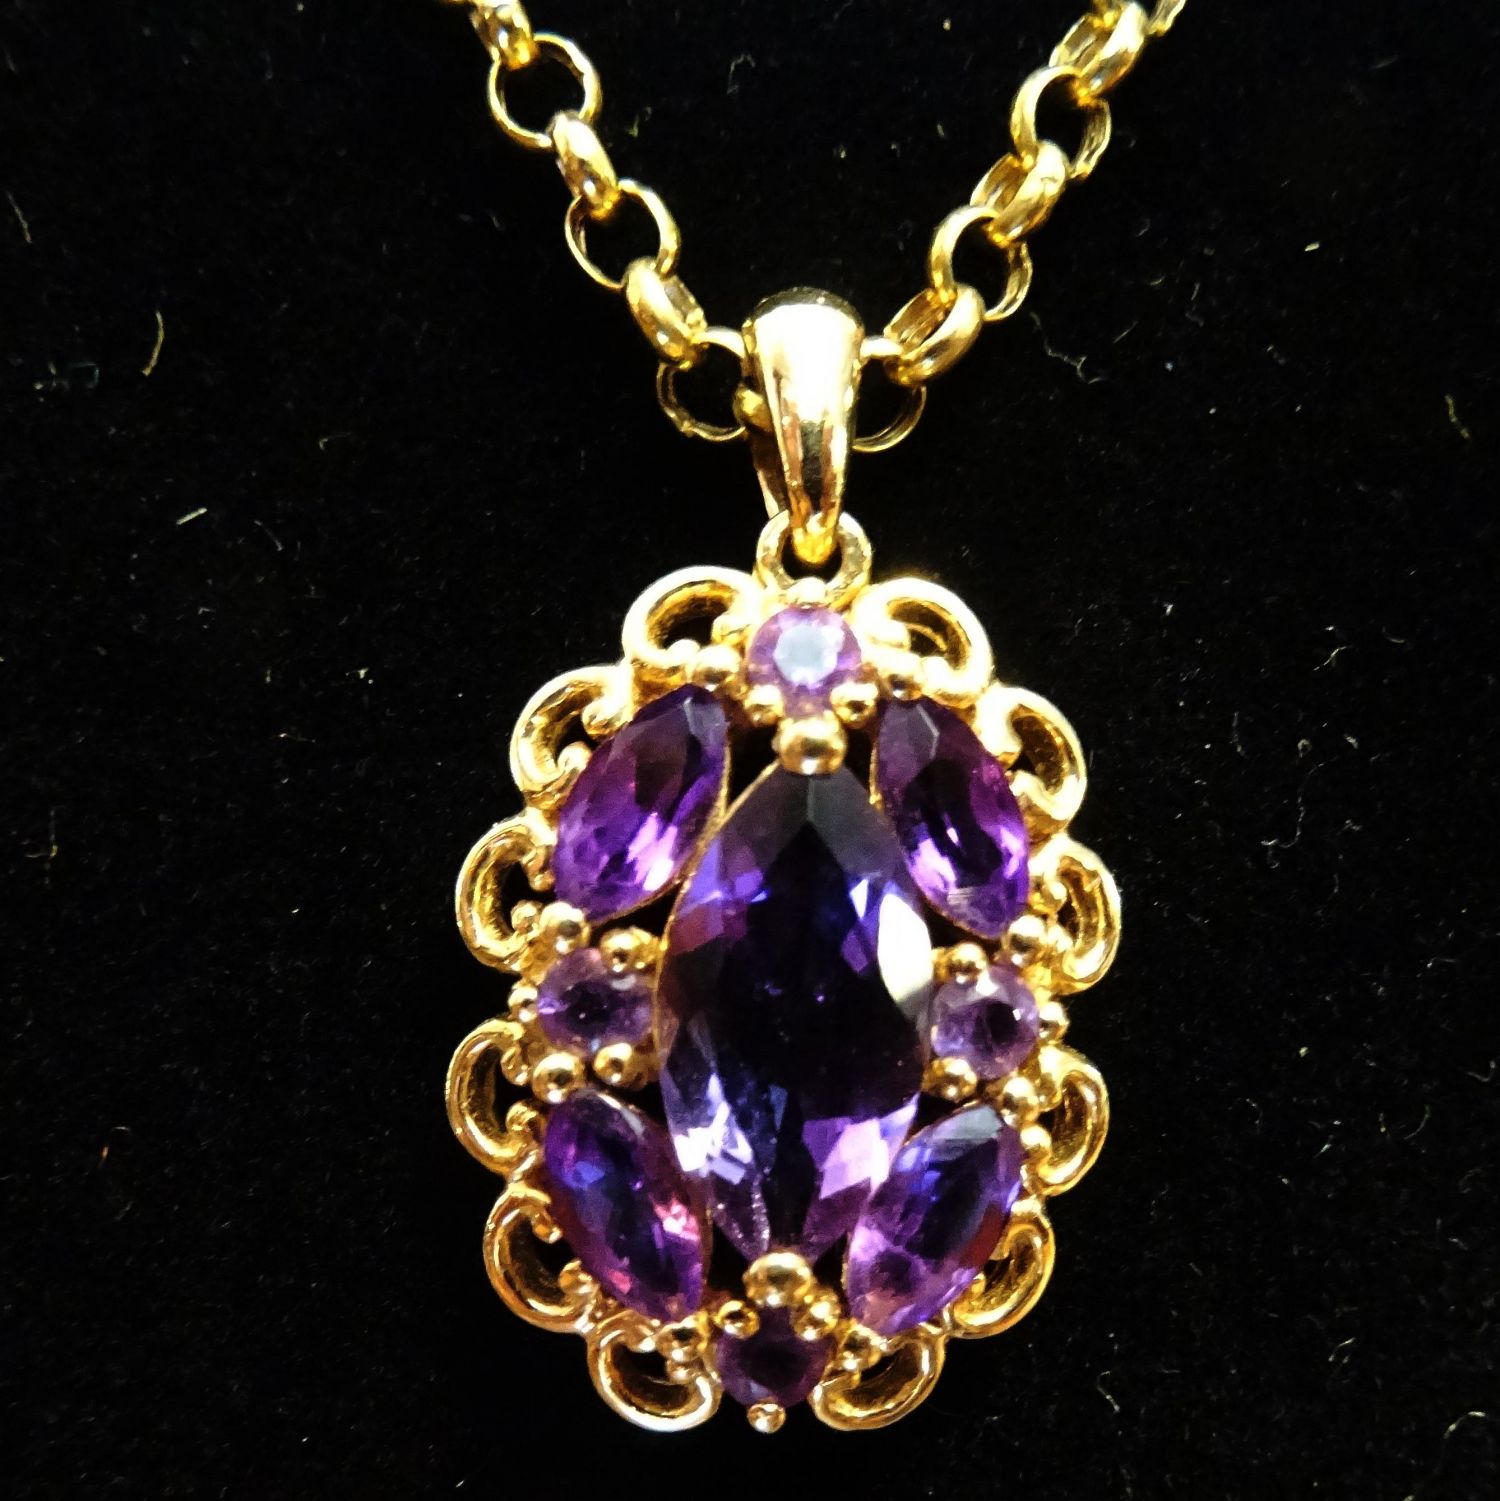 14ct Gold and amethyst pendant - Jewellery & Gold - Hemswell Antique